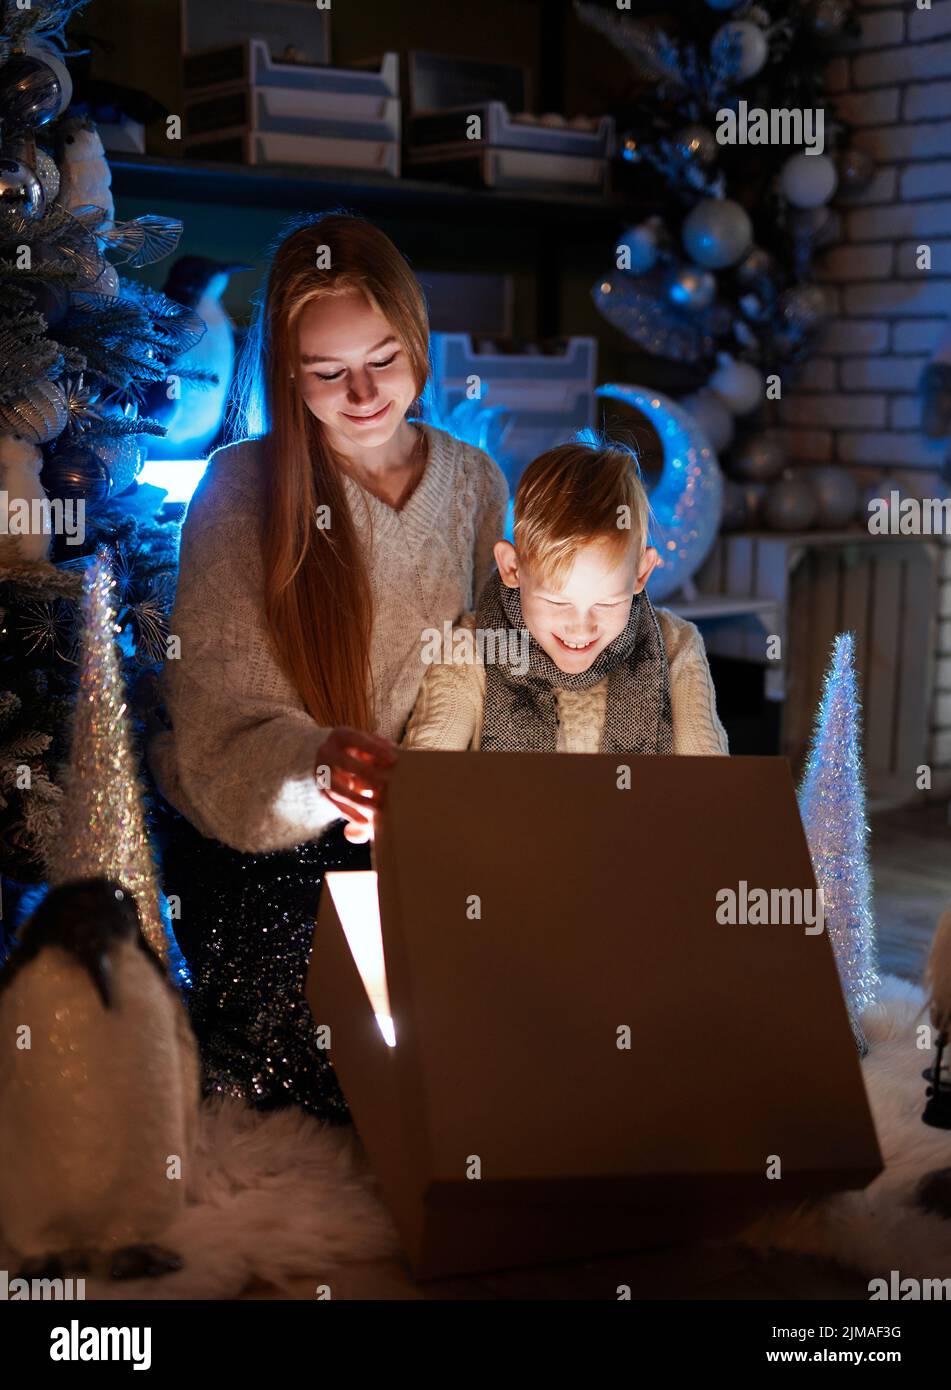 Caucasian kids, sister and brother are celebrating winter holidays. Girl and boy opening Christmas gift at decorated home. Christmas. Happiness. High quality vertical image Stock Photo